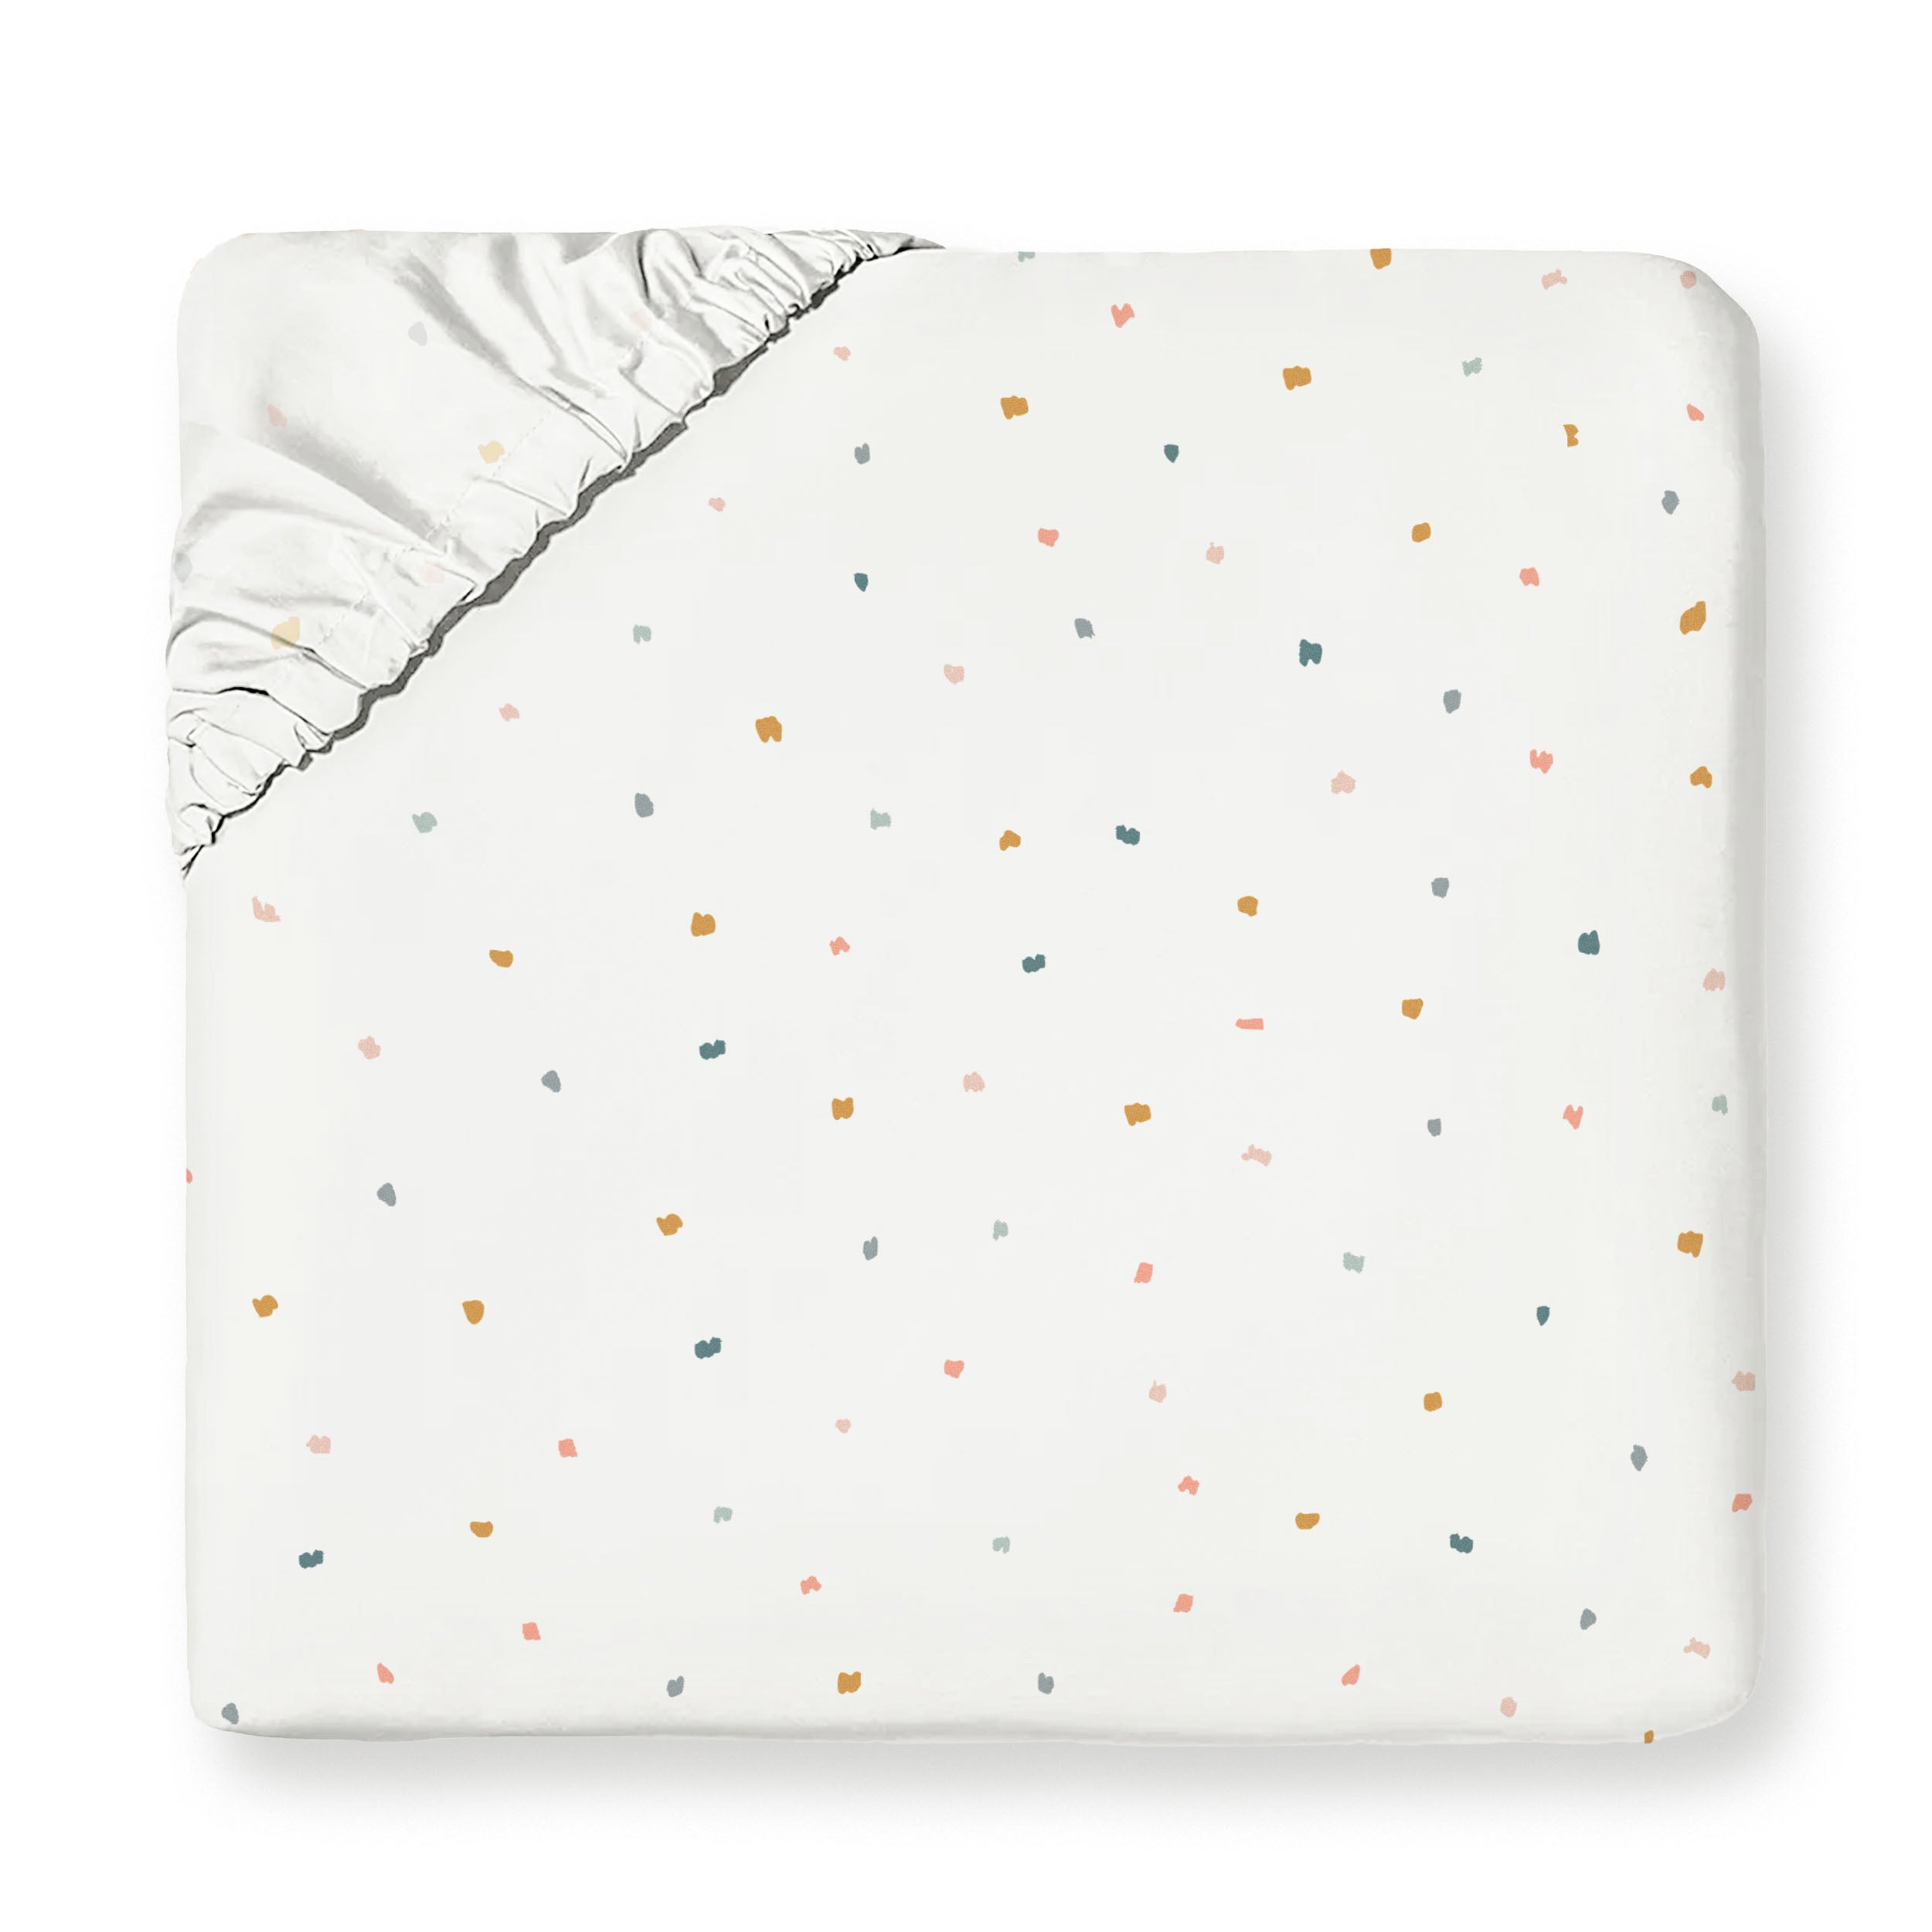 A baby blanket with a white background featuring a multicolored confetti pattern and a silver satin trim, neatly folded into a square shape is the Organic Cotton Fitted Sheet Set - Dotty by Makemake Organics.